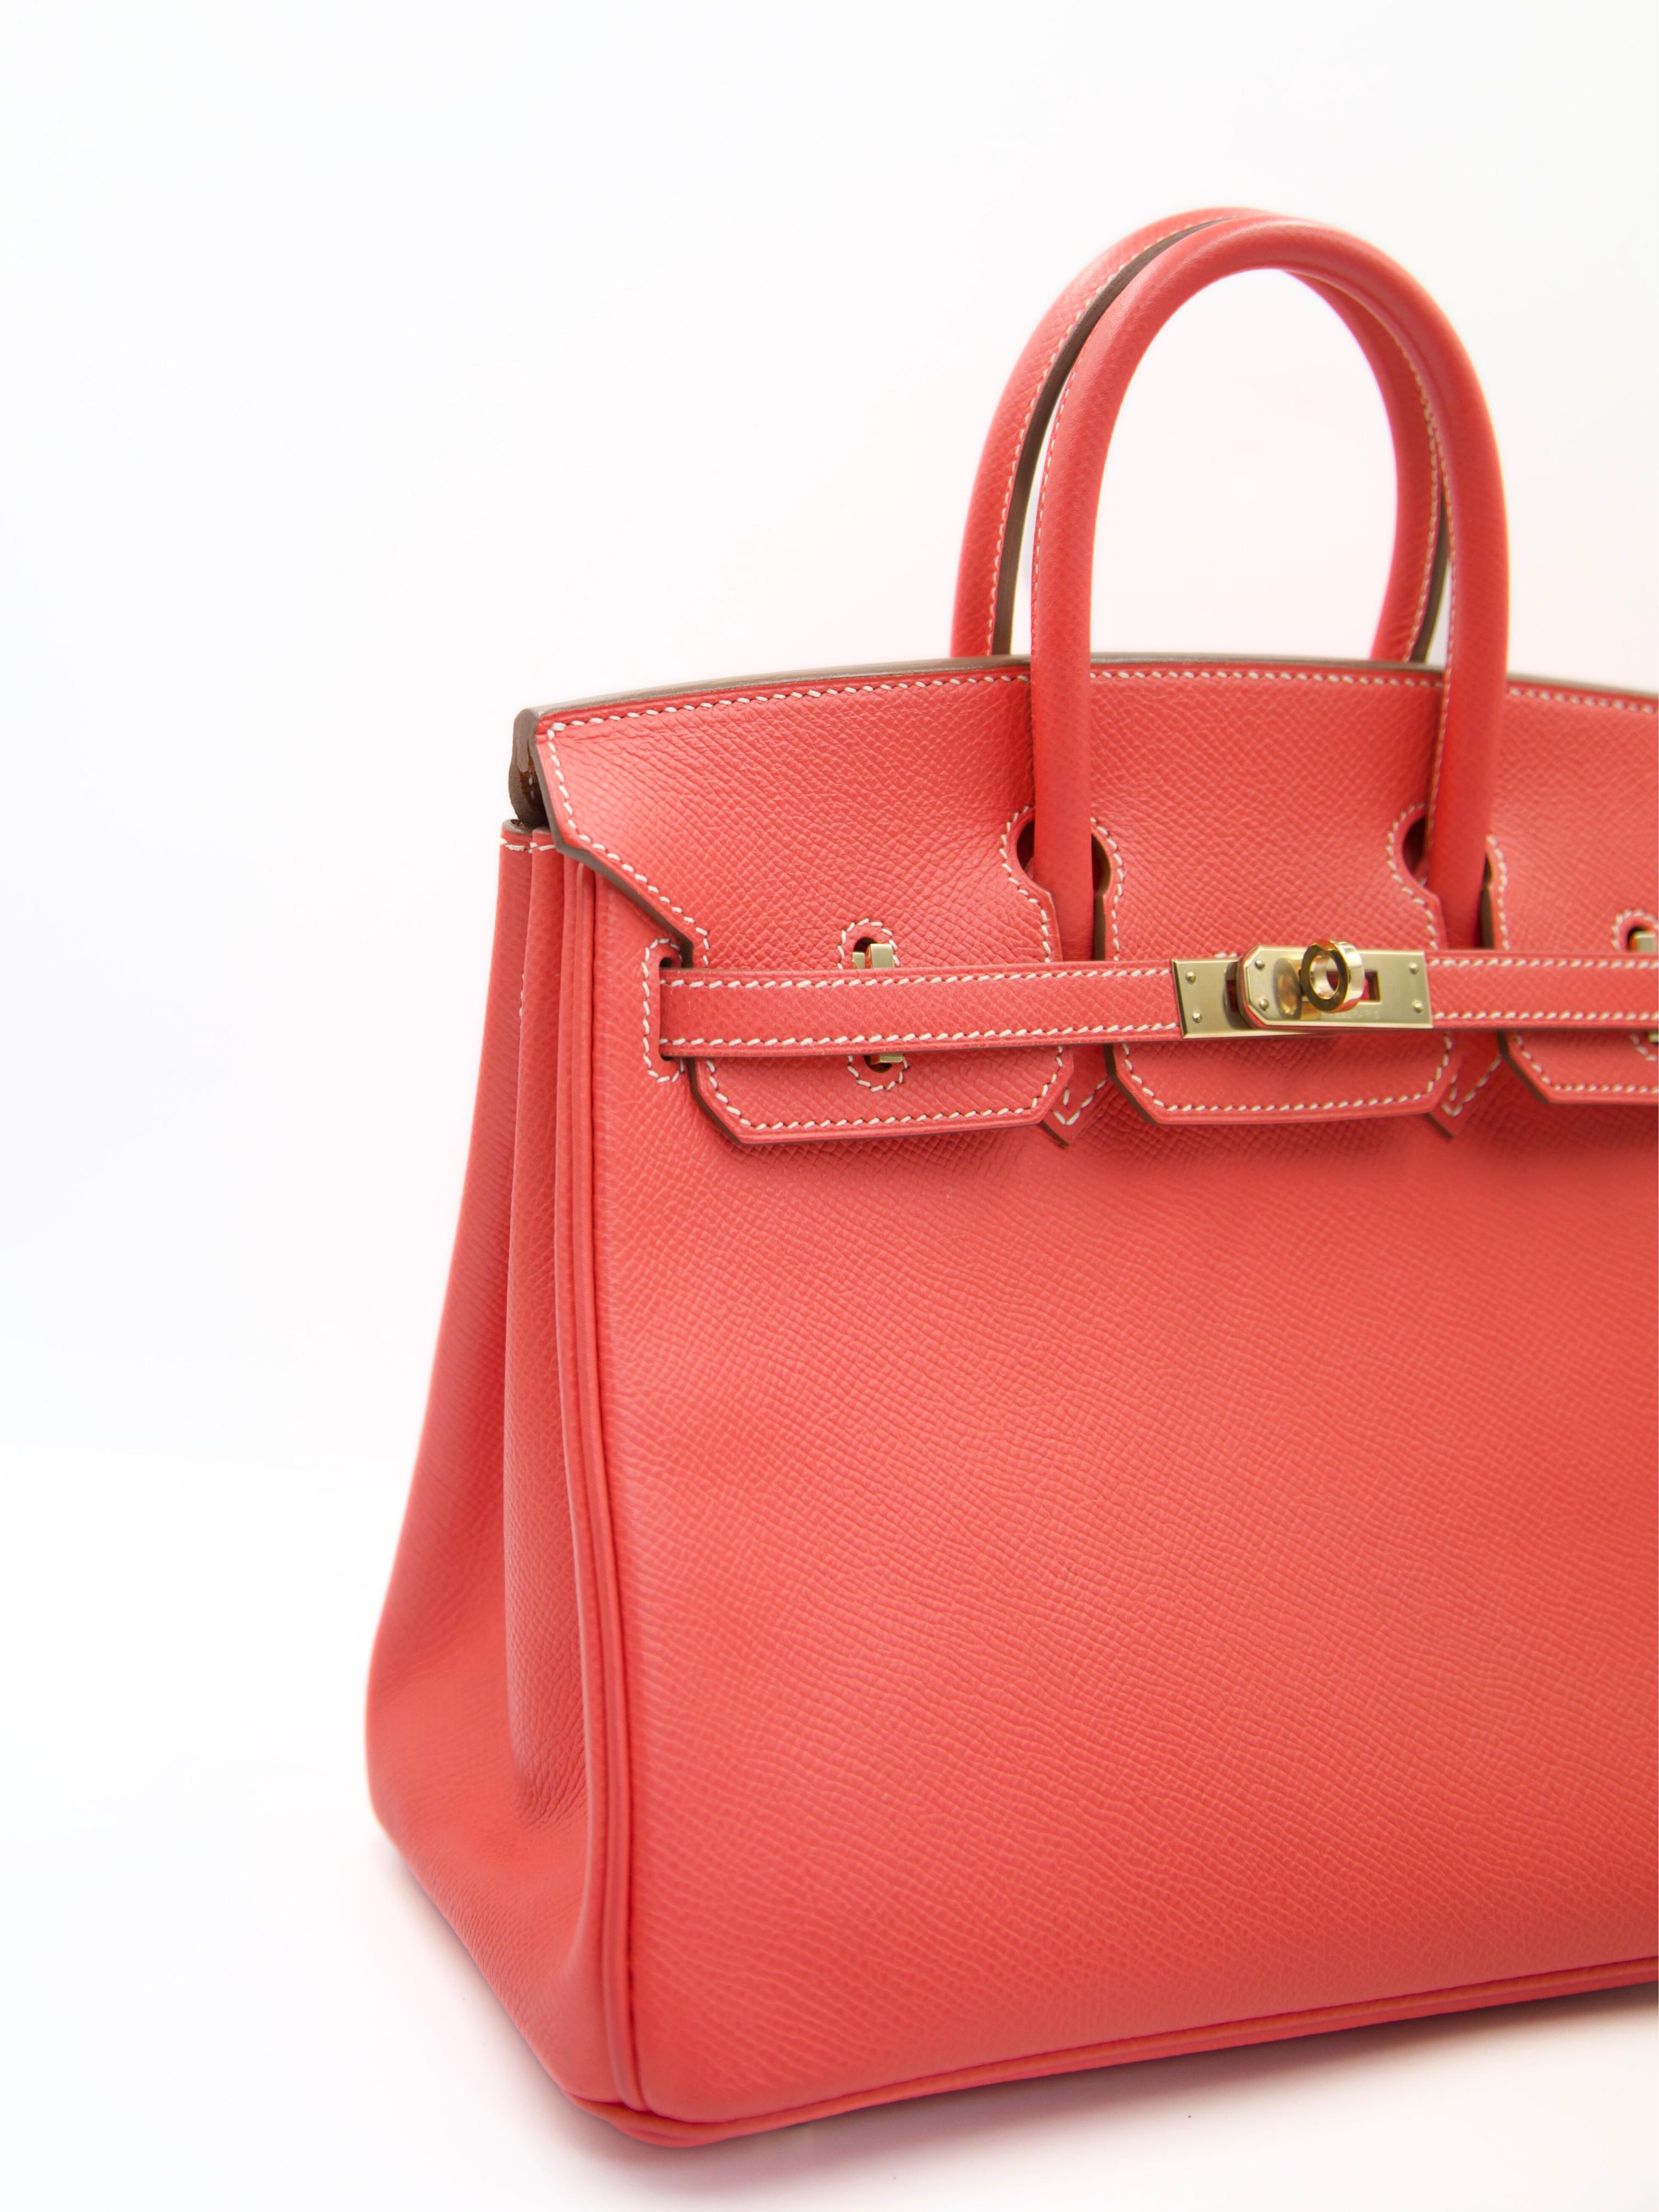 RARE HERMÈS BIRKIN 25CM 'VERSO' ROUGE JAIPUR WITH GOLD INTERIOR Epsom Permabrass In Excellent Condition For Sale In London, GB